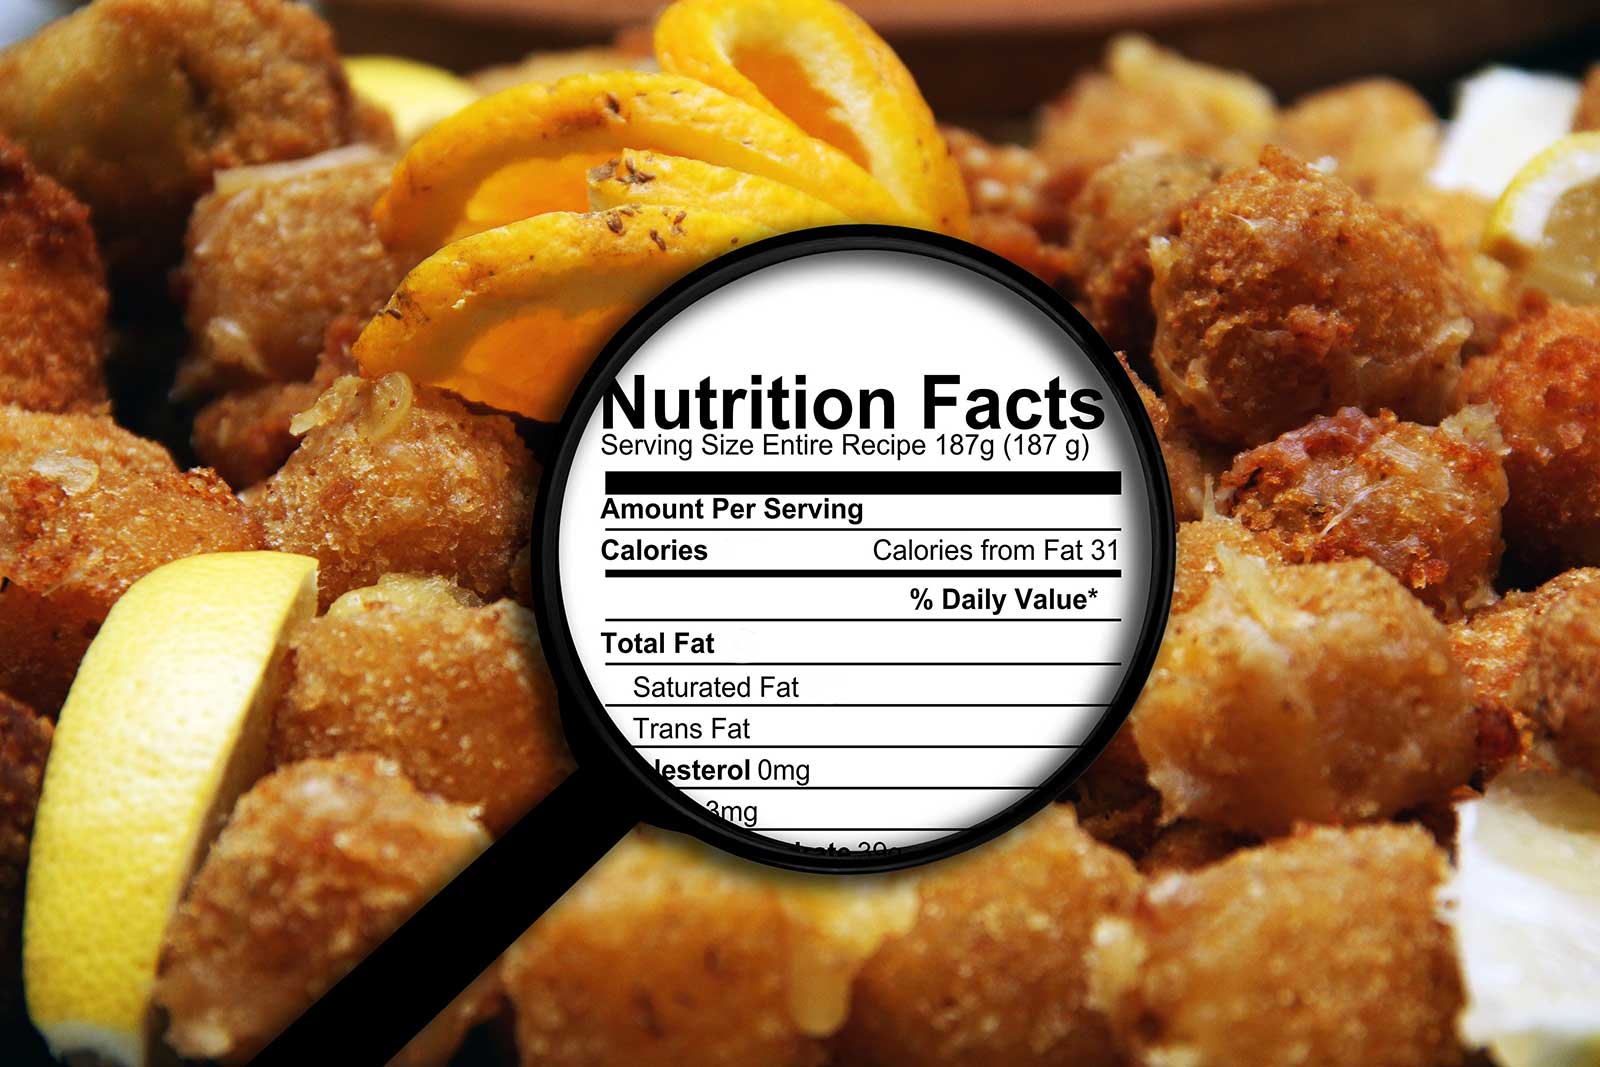 Magnifying glass over nutrition facts overlaying fried food